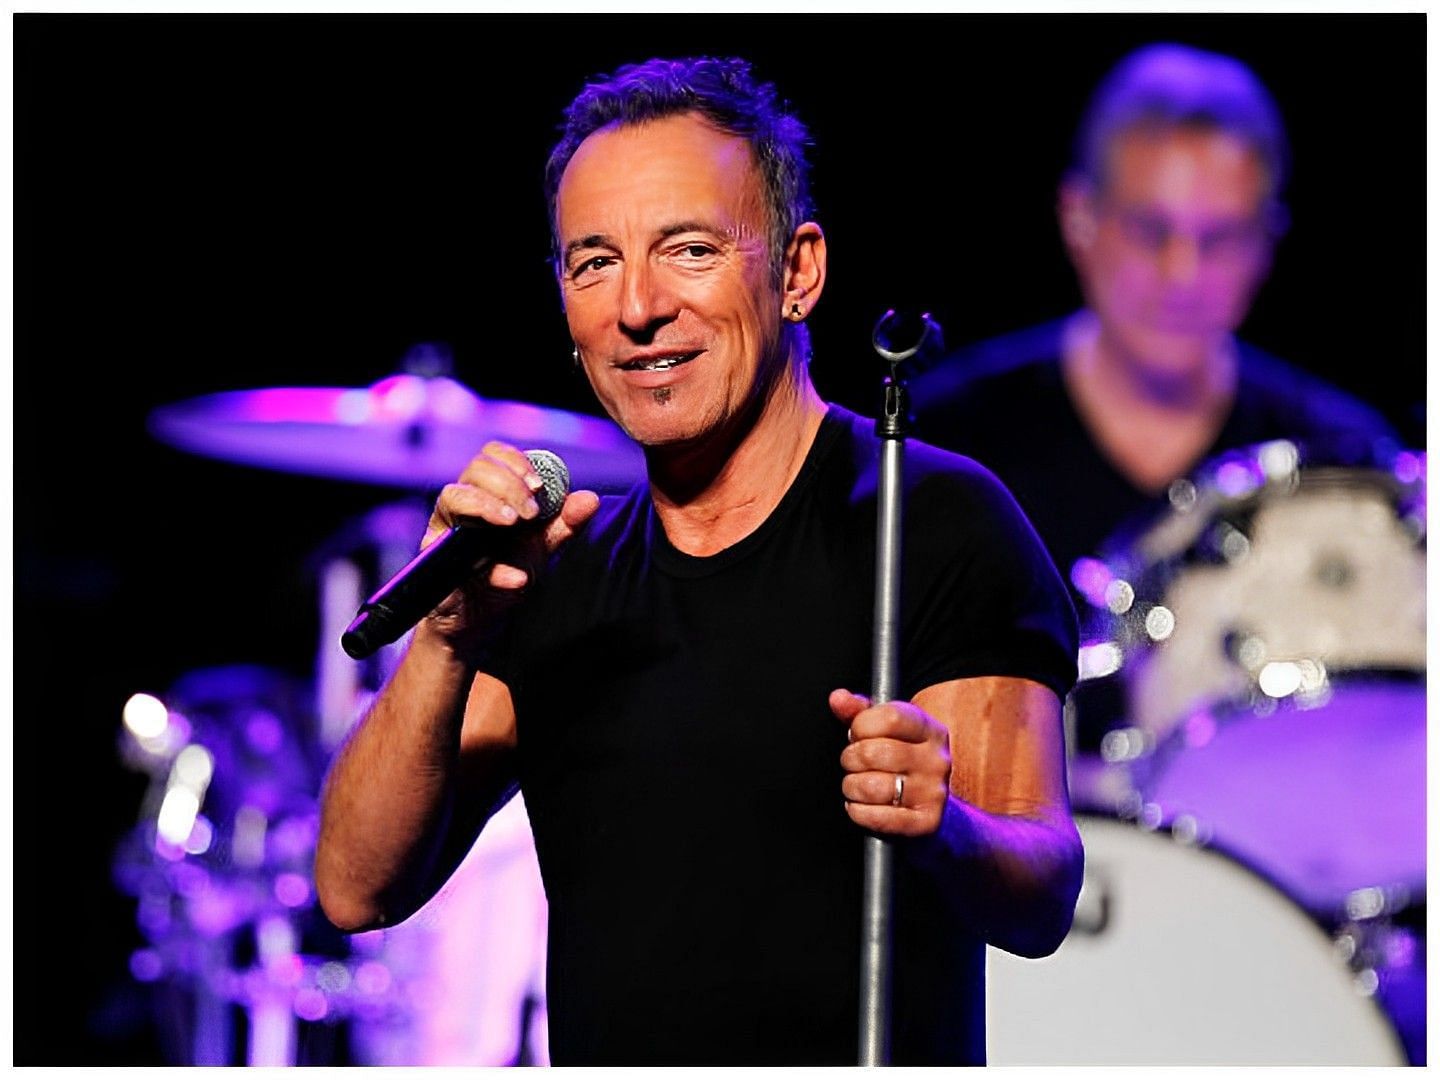 Bruce Springsteen reportedly feel sick during his tour (Image sourced via Getty Images)